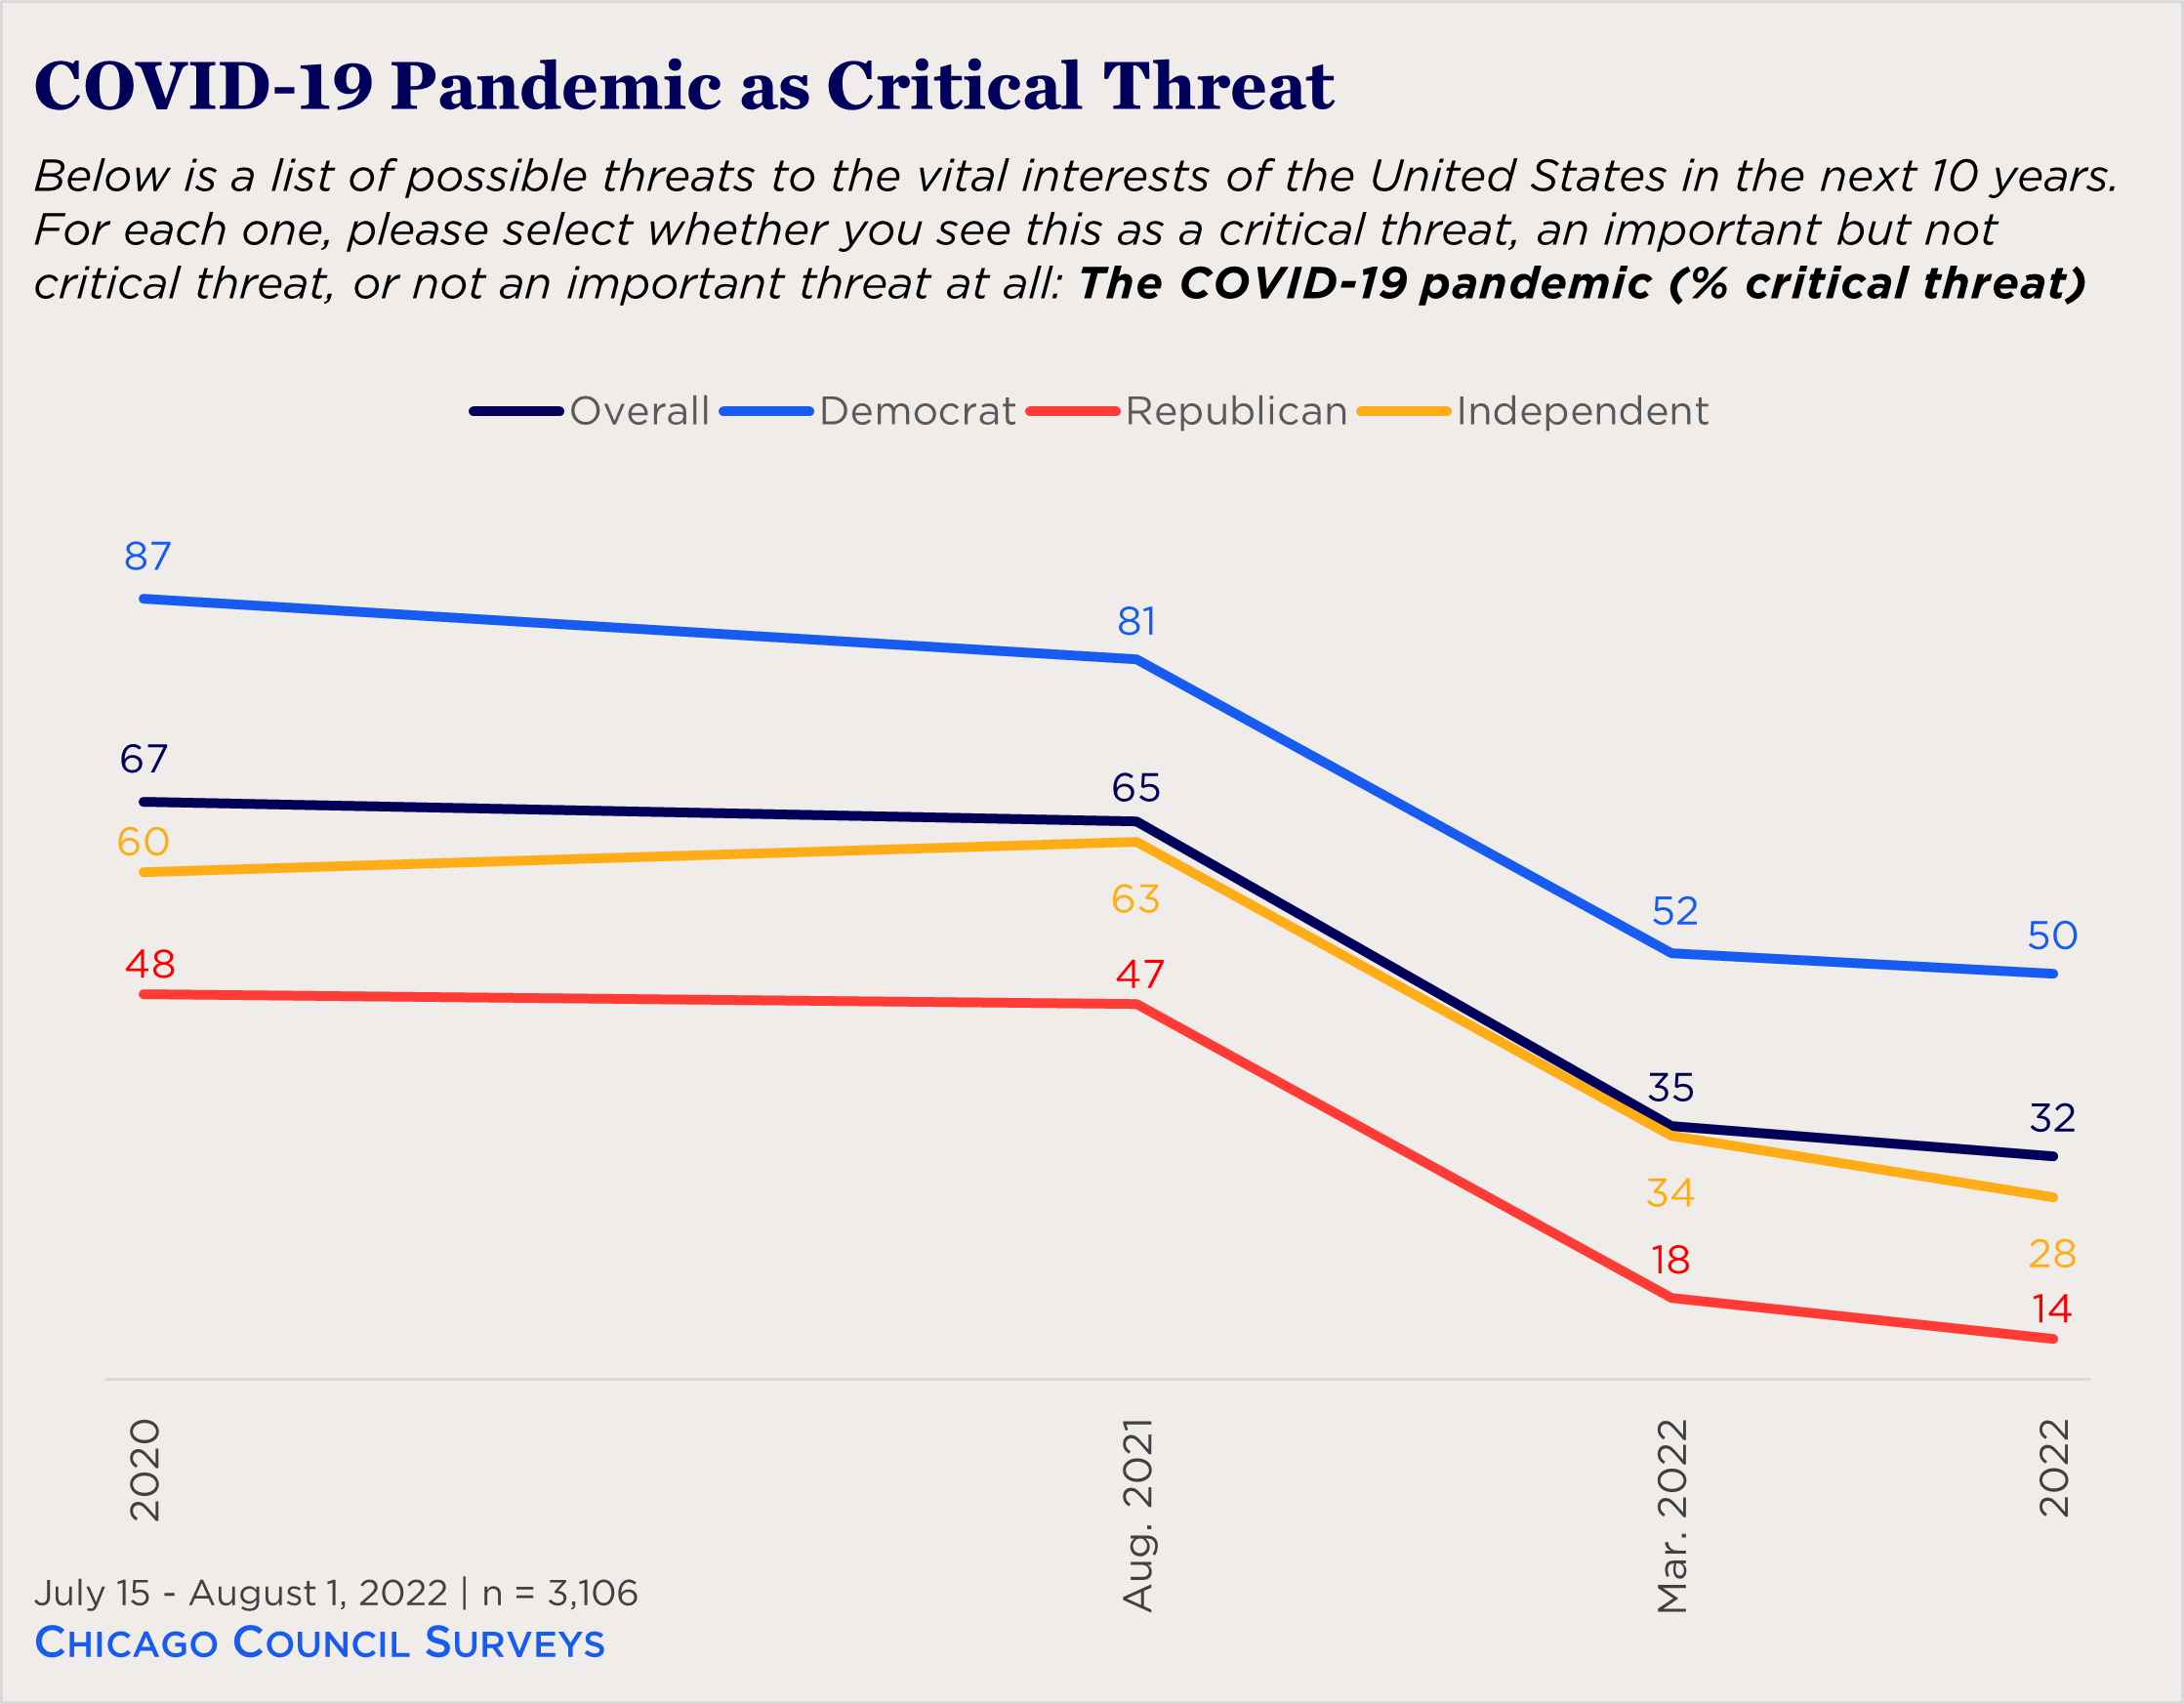 "line chart showing partisan views of covid-19 as a critical threat"